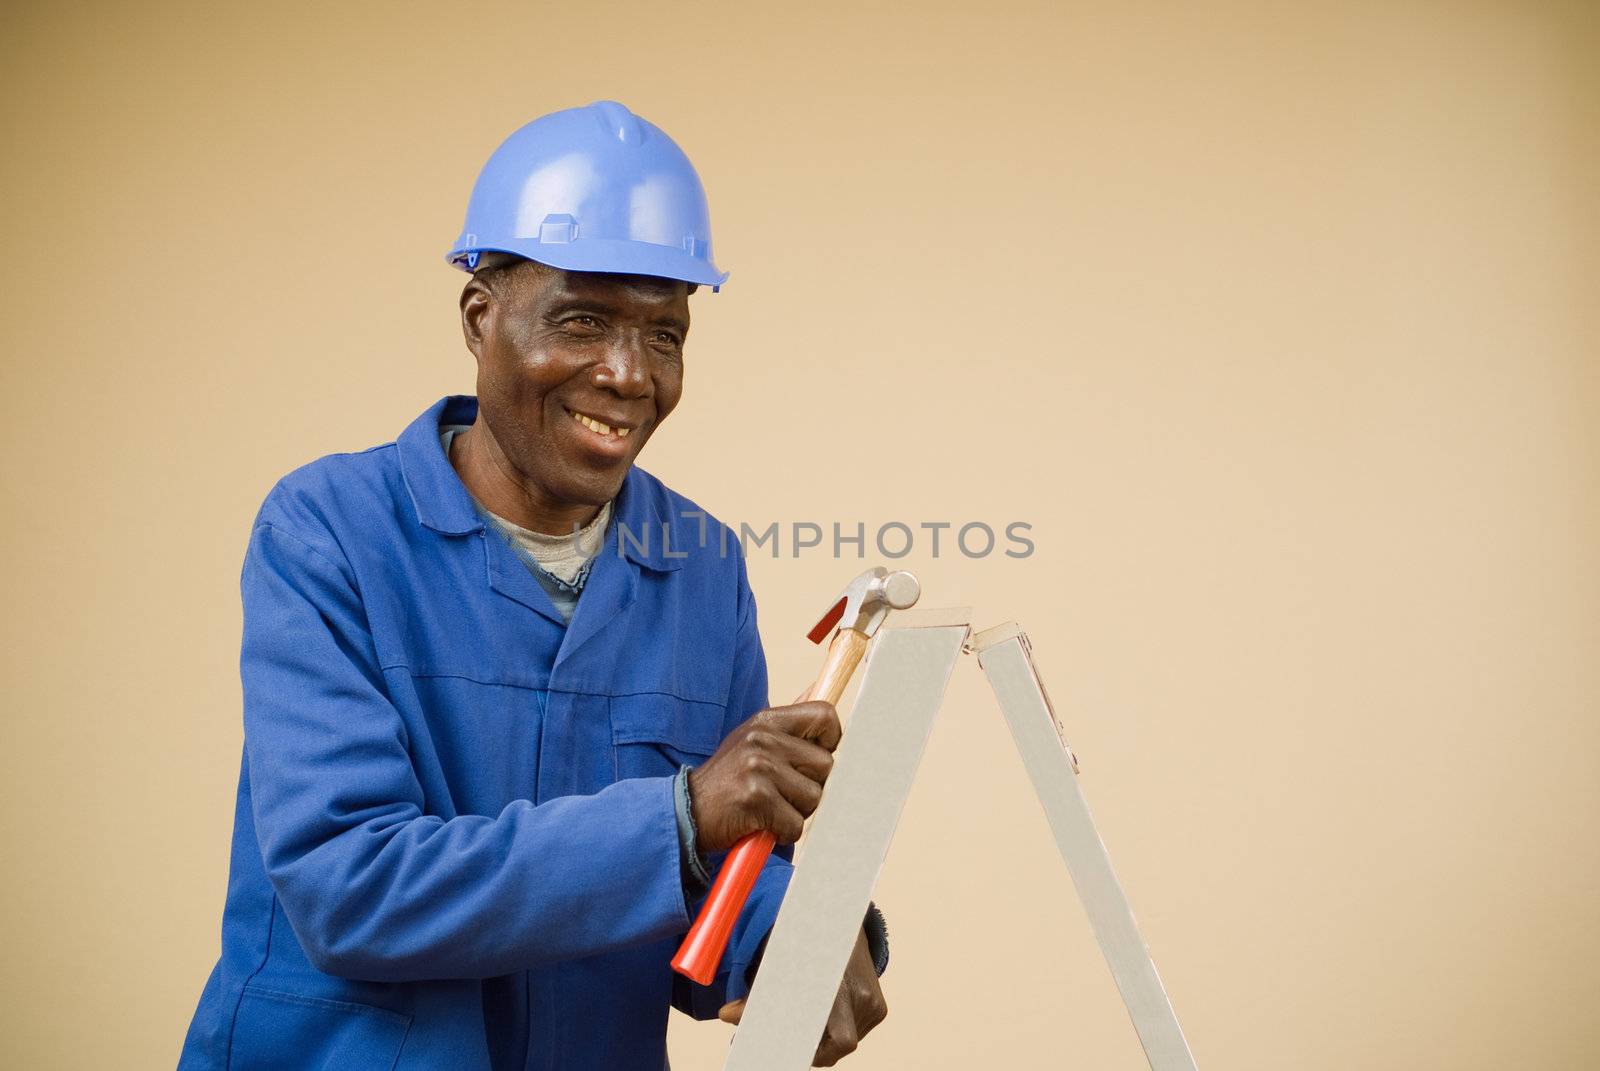 Construction worker holding hammer on ladder by alistaircotton